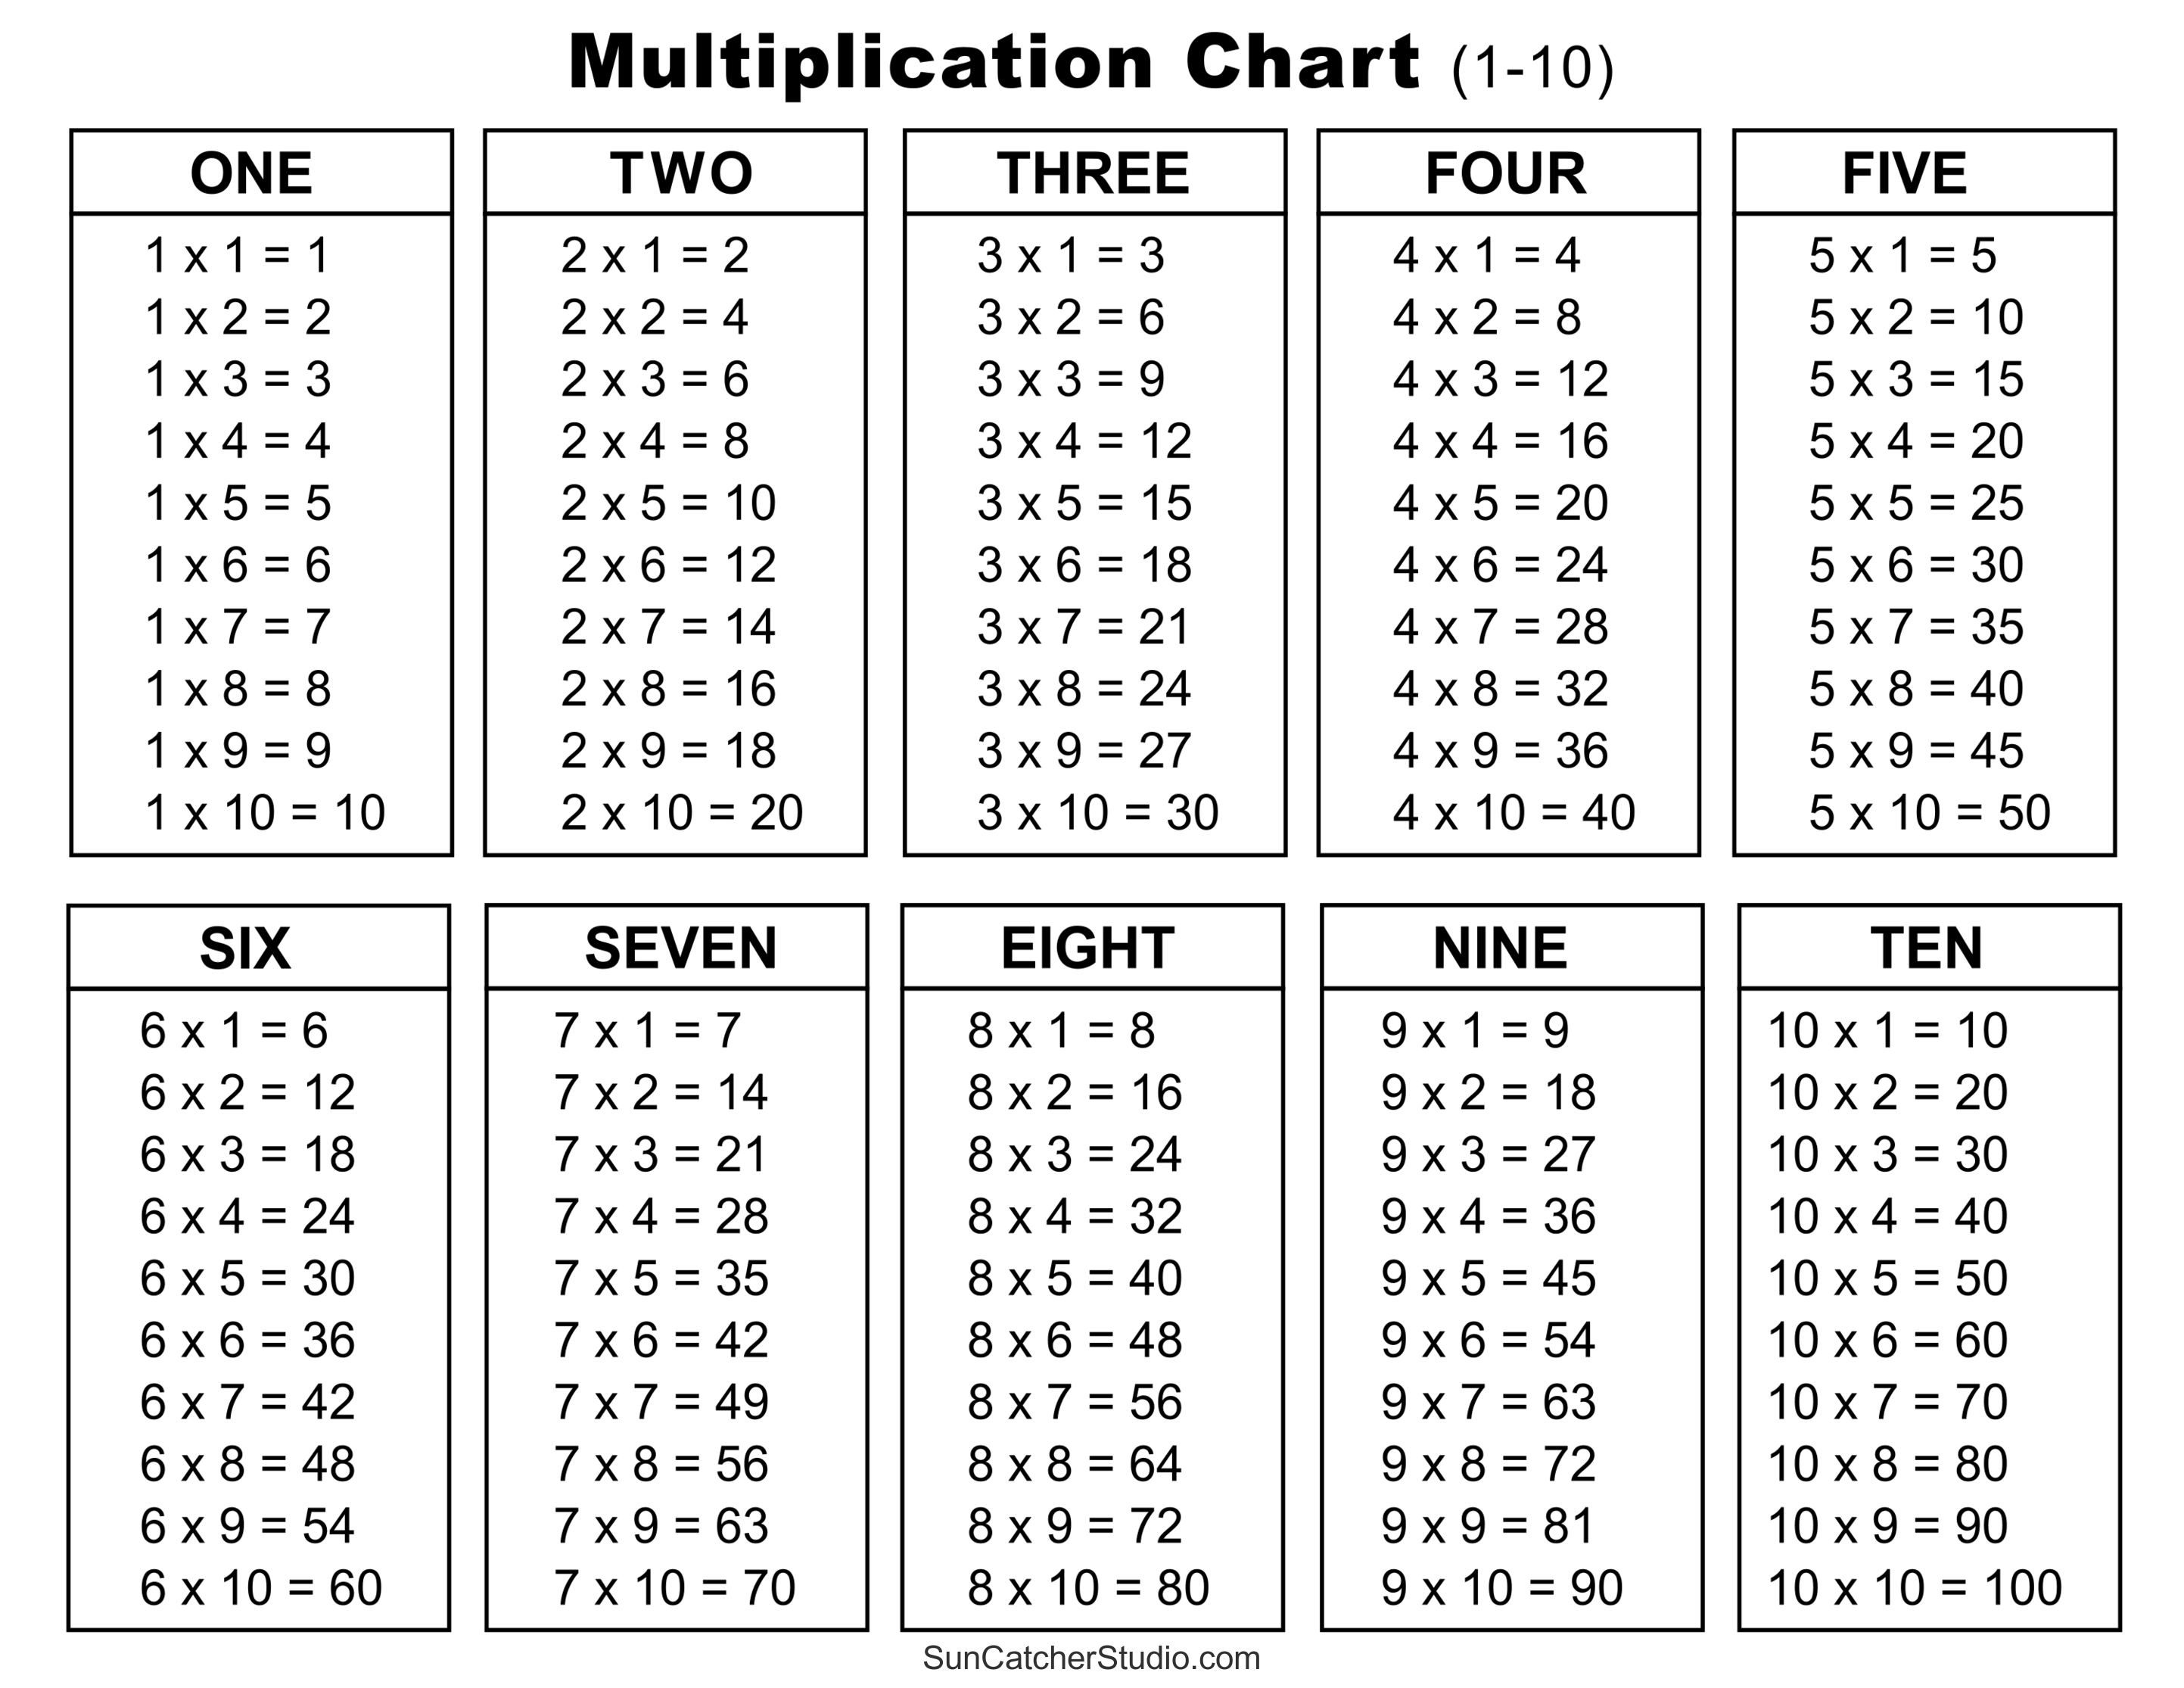 MULTIPLICATION TABLE CHART